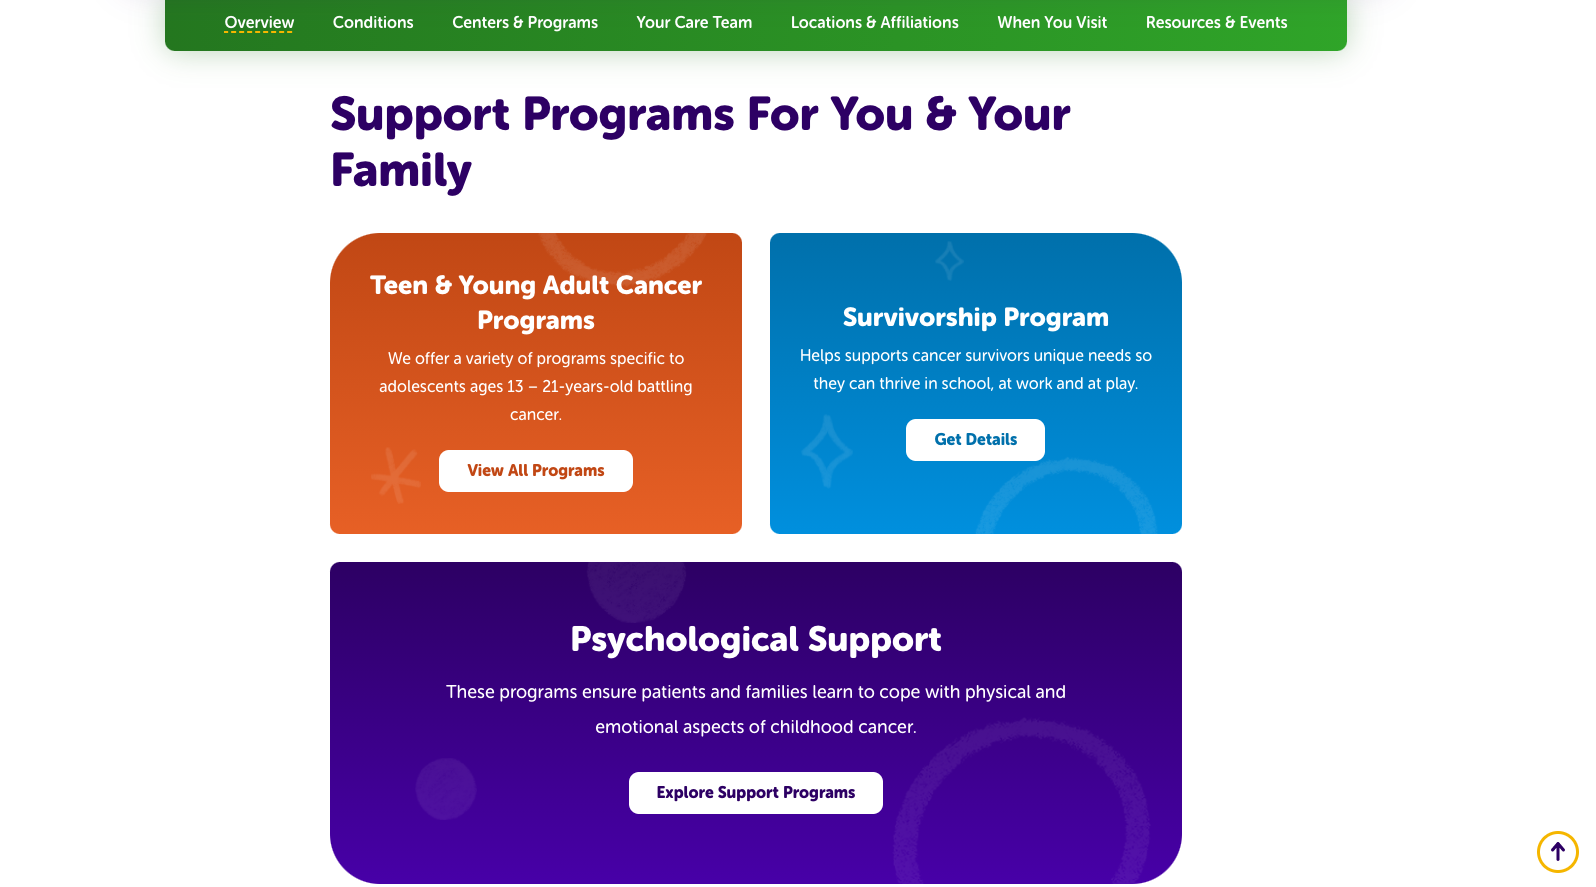 Support Programs